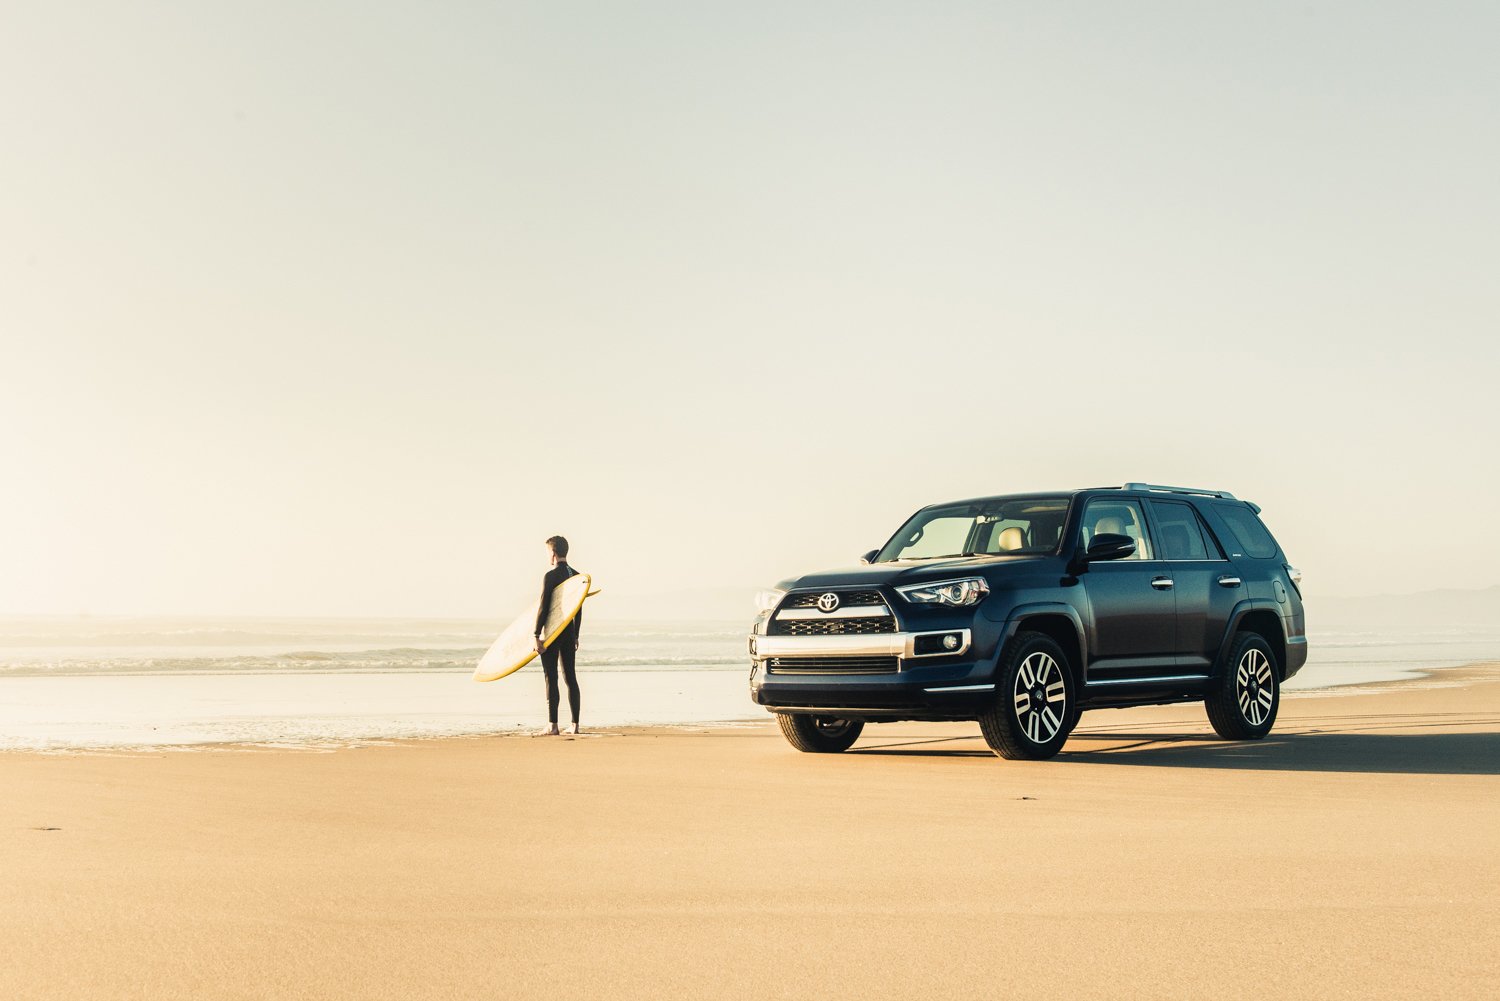 A surfer walks into the ocean with his board while his Toyota 4Runner is parked on the beach, photo by Mark Skovorodko.